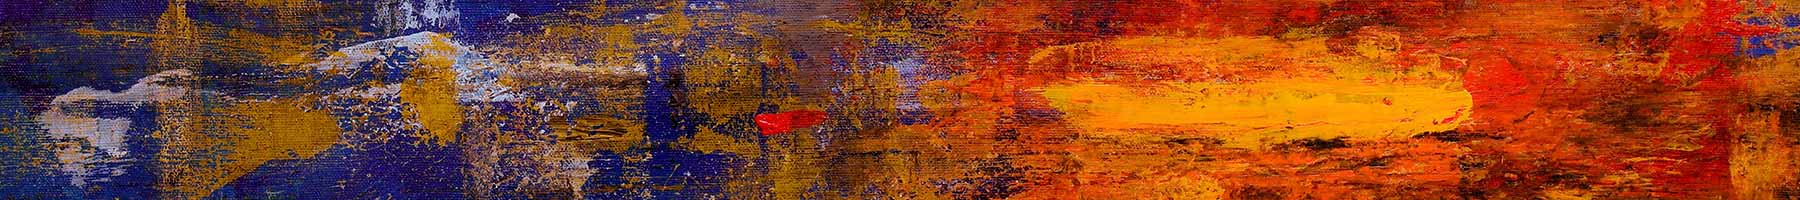 Abstract painting in red, orange and navy tones